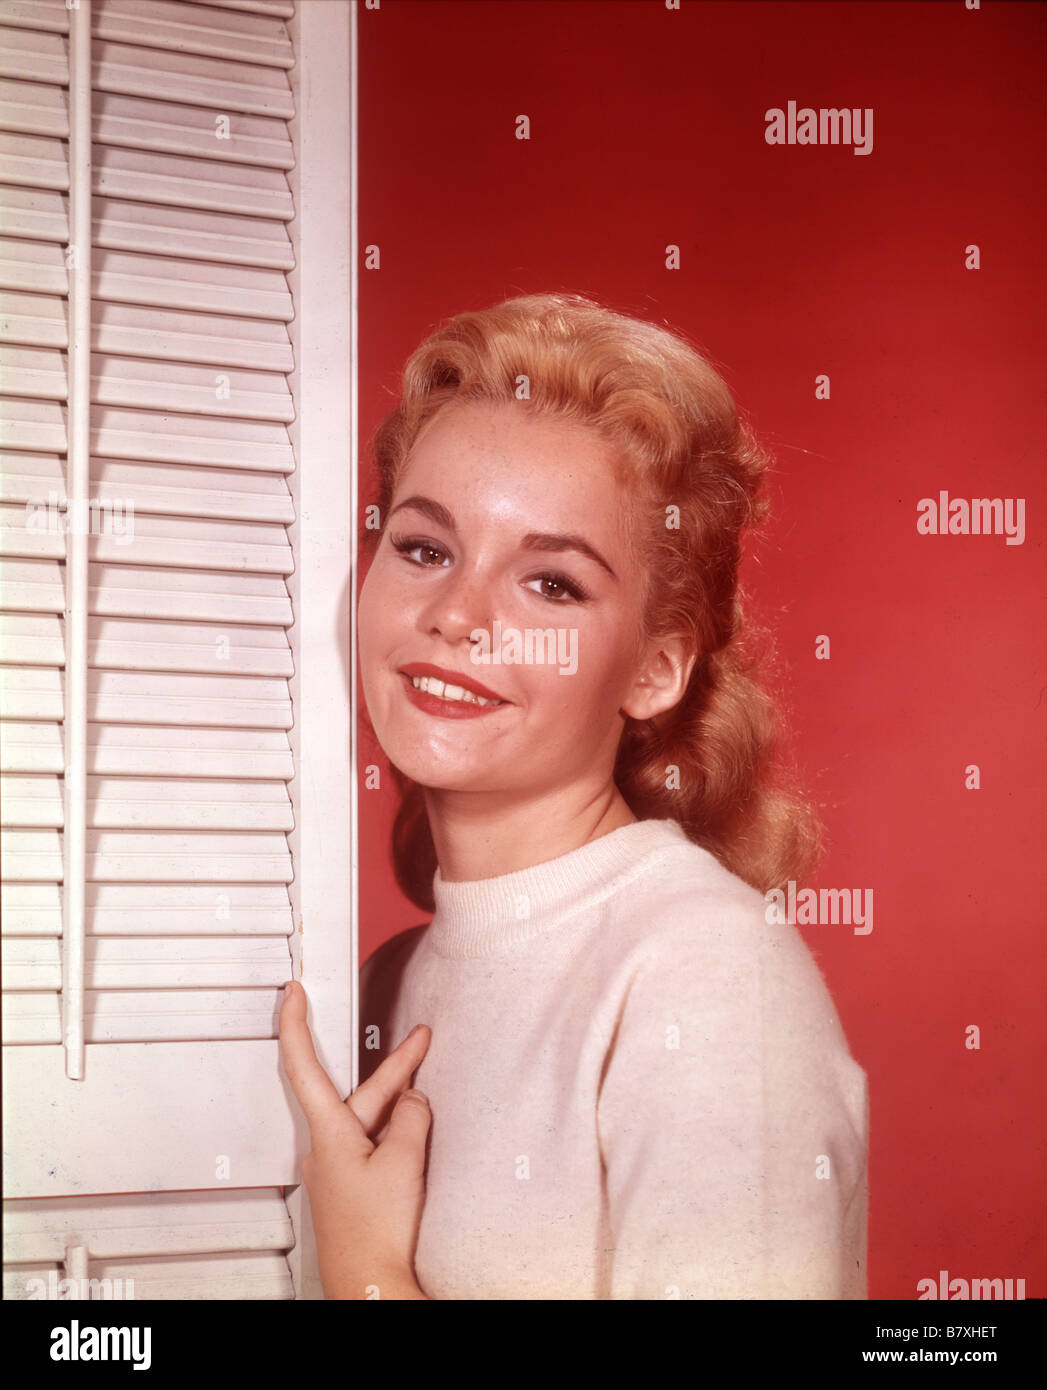 827 Tuesday Weld Photos & High Res Pictures - Getty Images